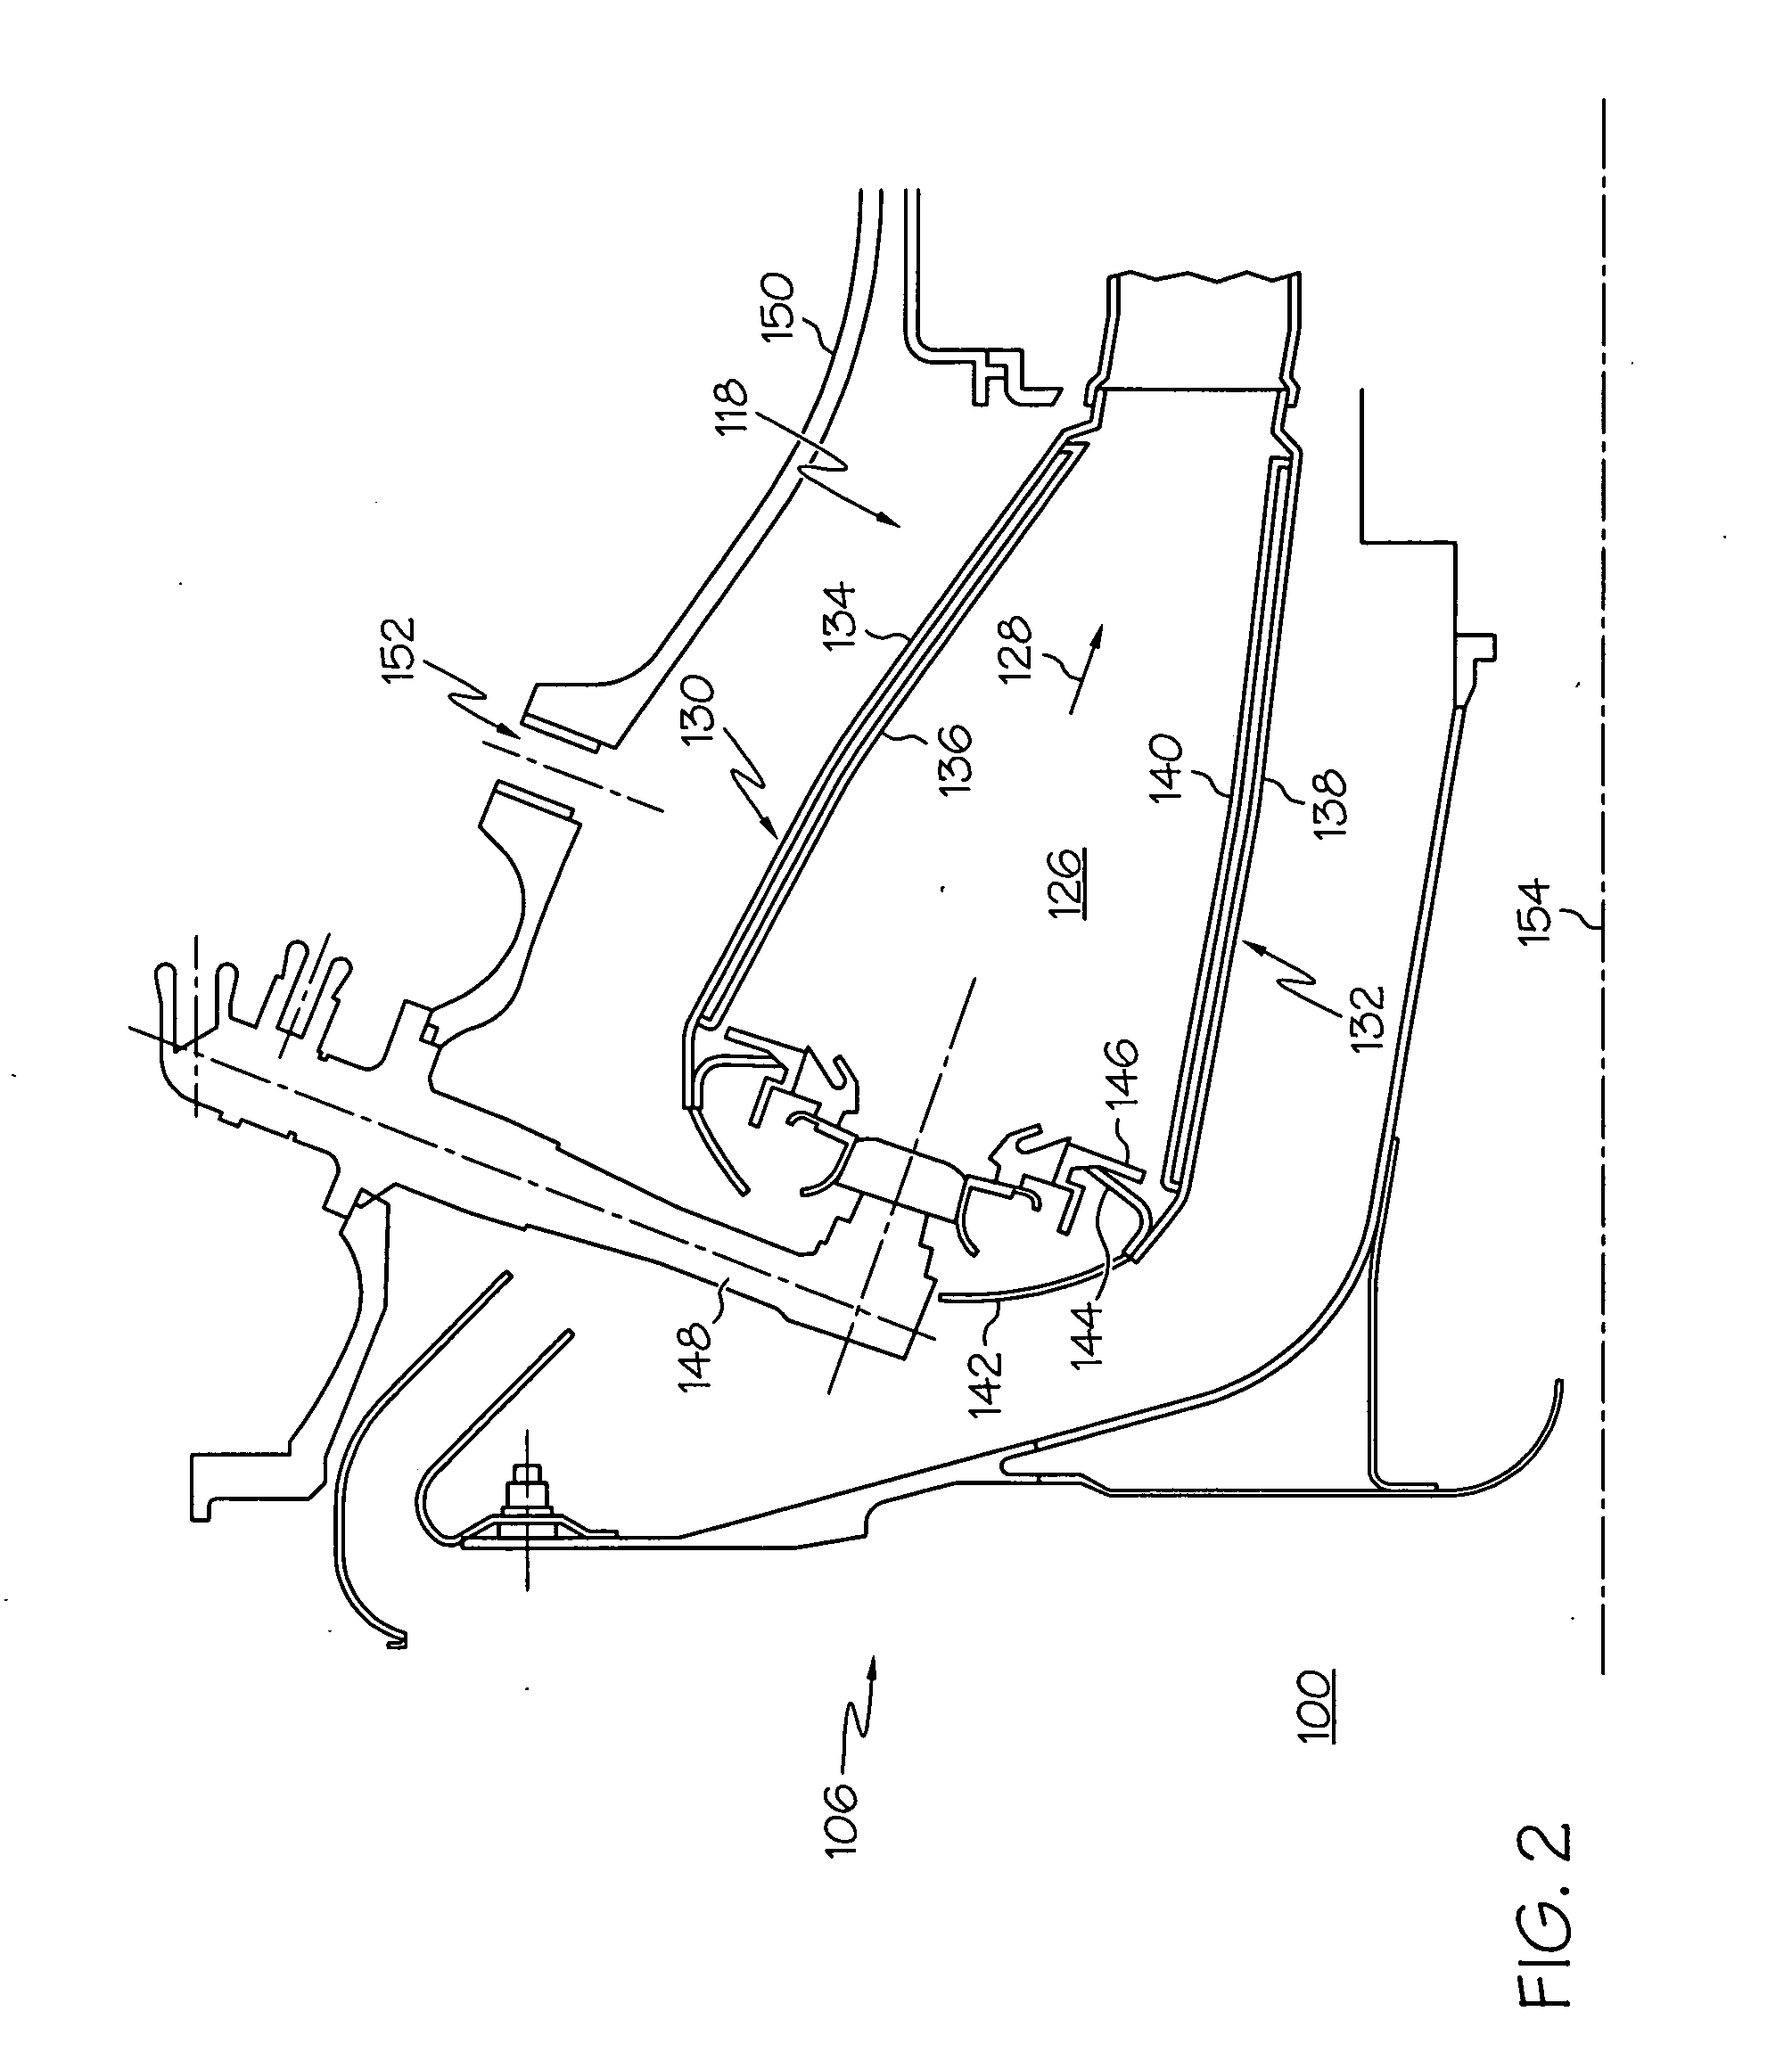 Dual wall structure for use in a combustor of a gas turbine engine